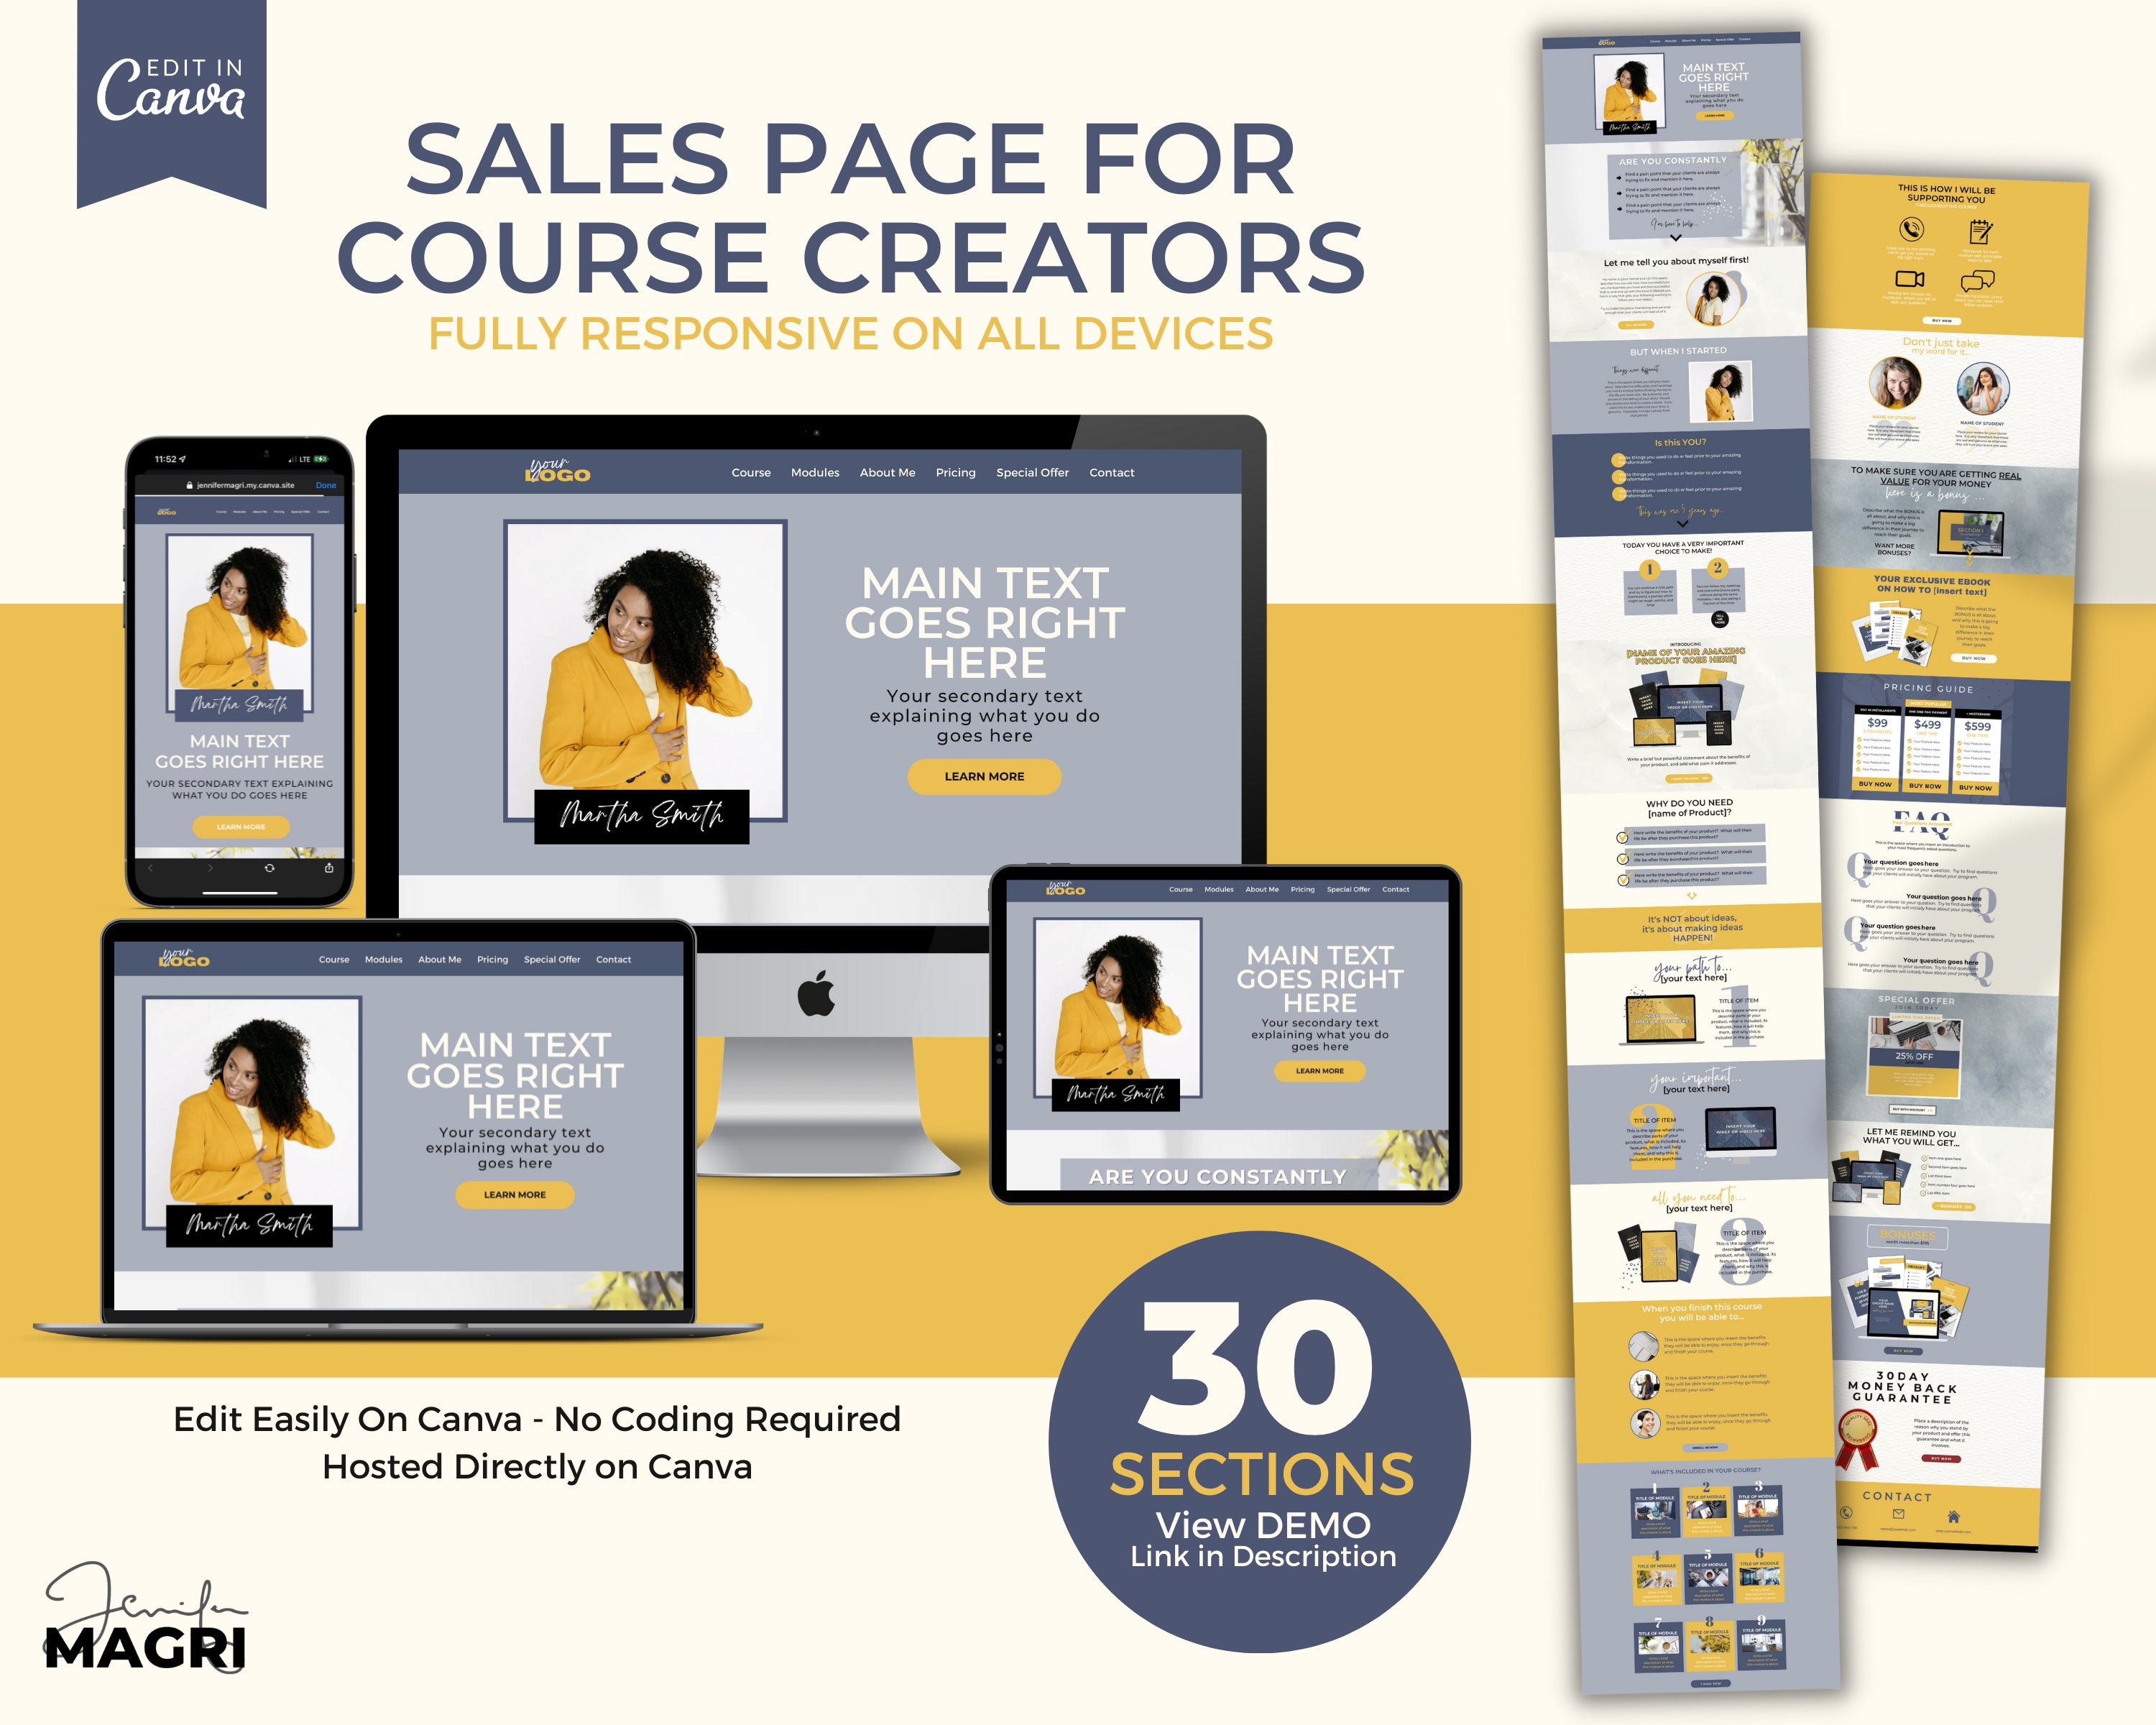 CANVA SALES PAGE Landing Page Template for Coaches and Course